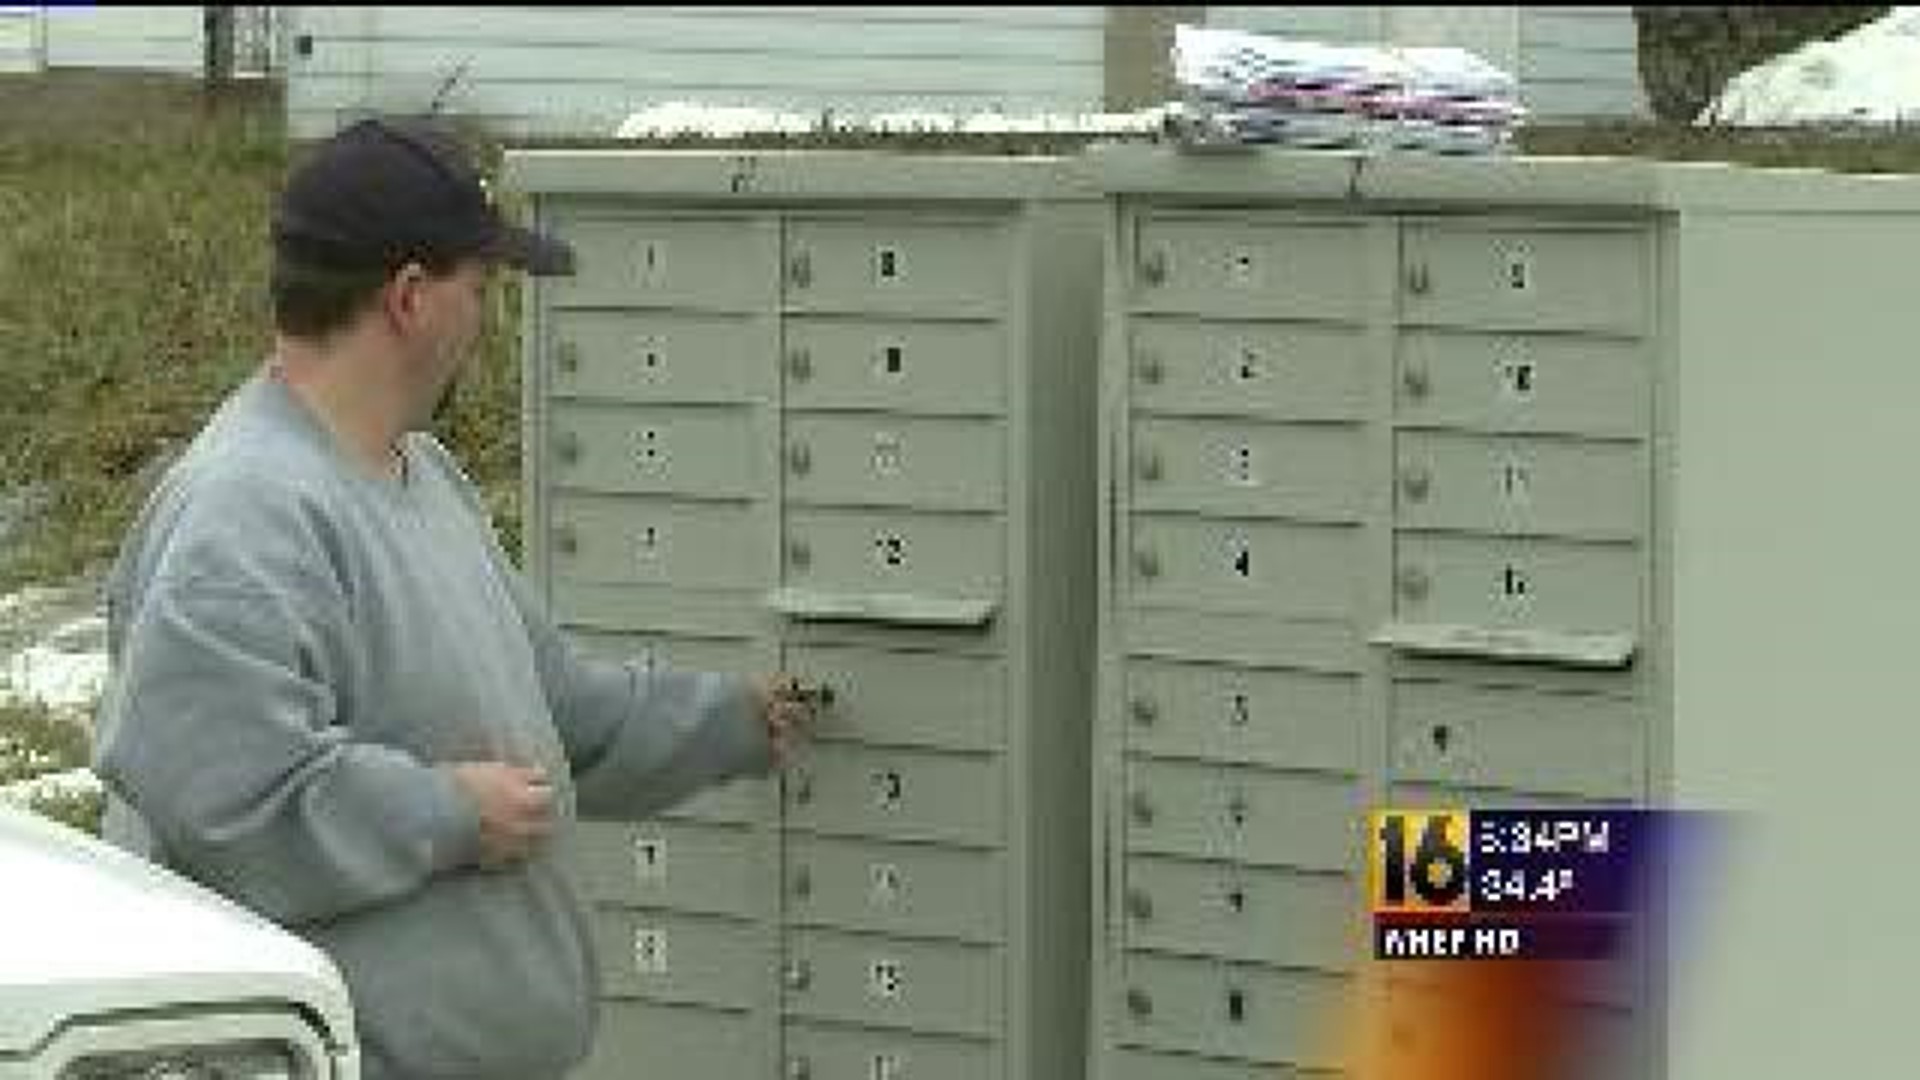 Cluster Boxes Replace Post Office in Gilberton